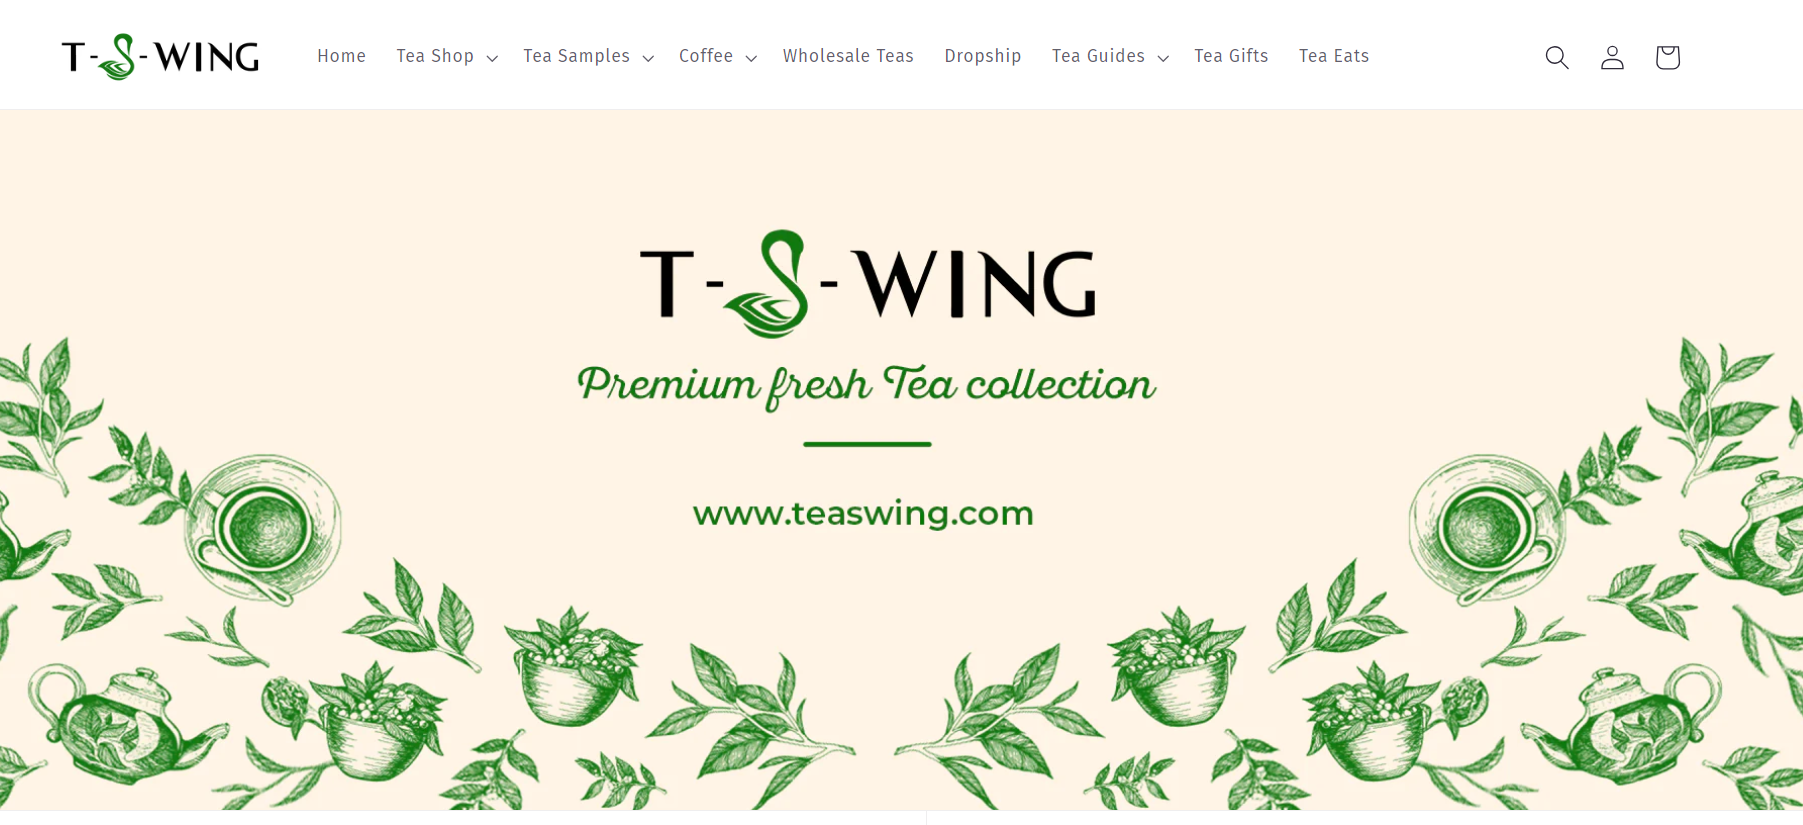 Tea Swan, based in India, is a private label supplier for tea products. They offer custom-branded tea products, including loose leaf tea, tea bags, and specialty teas, suitable for private label dropshipping. 